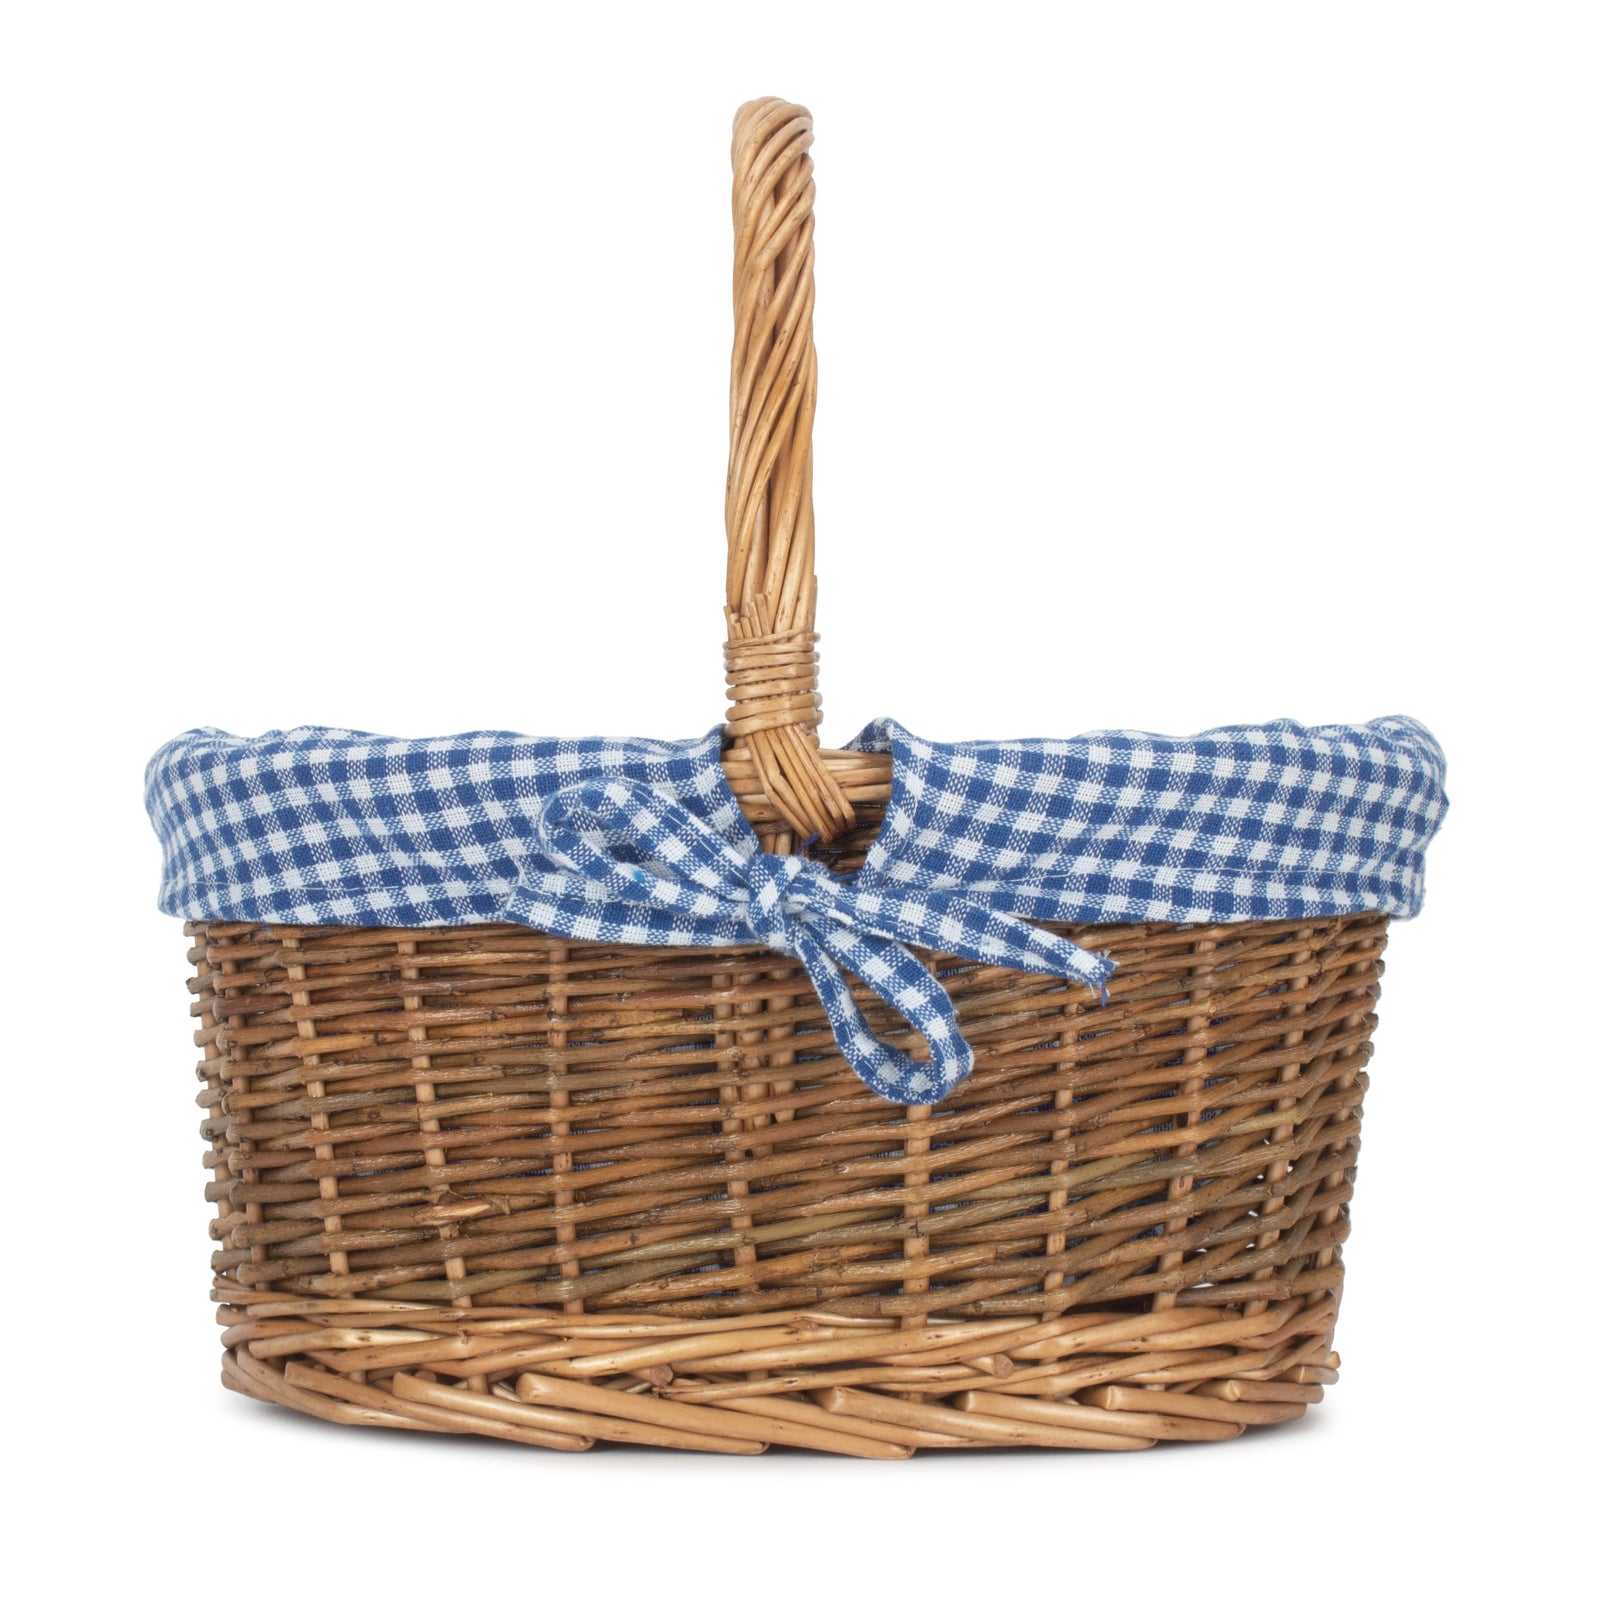 Red Hamper Blue Checked Lined Country Oval Wicker Shopping Basket